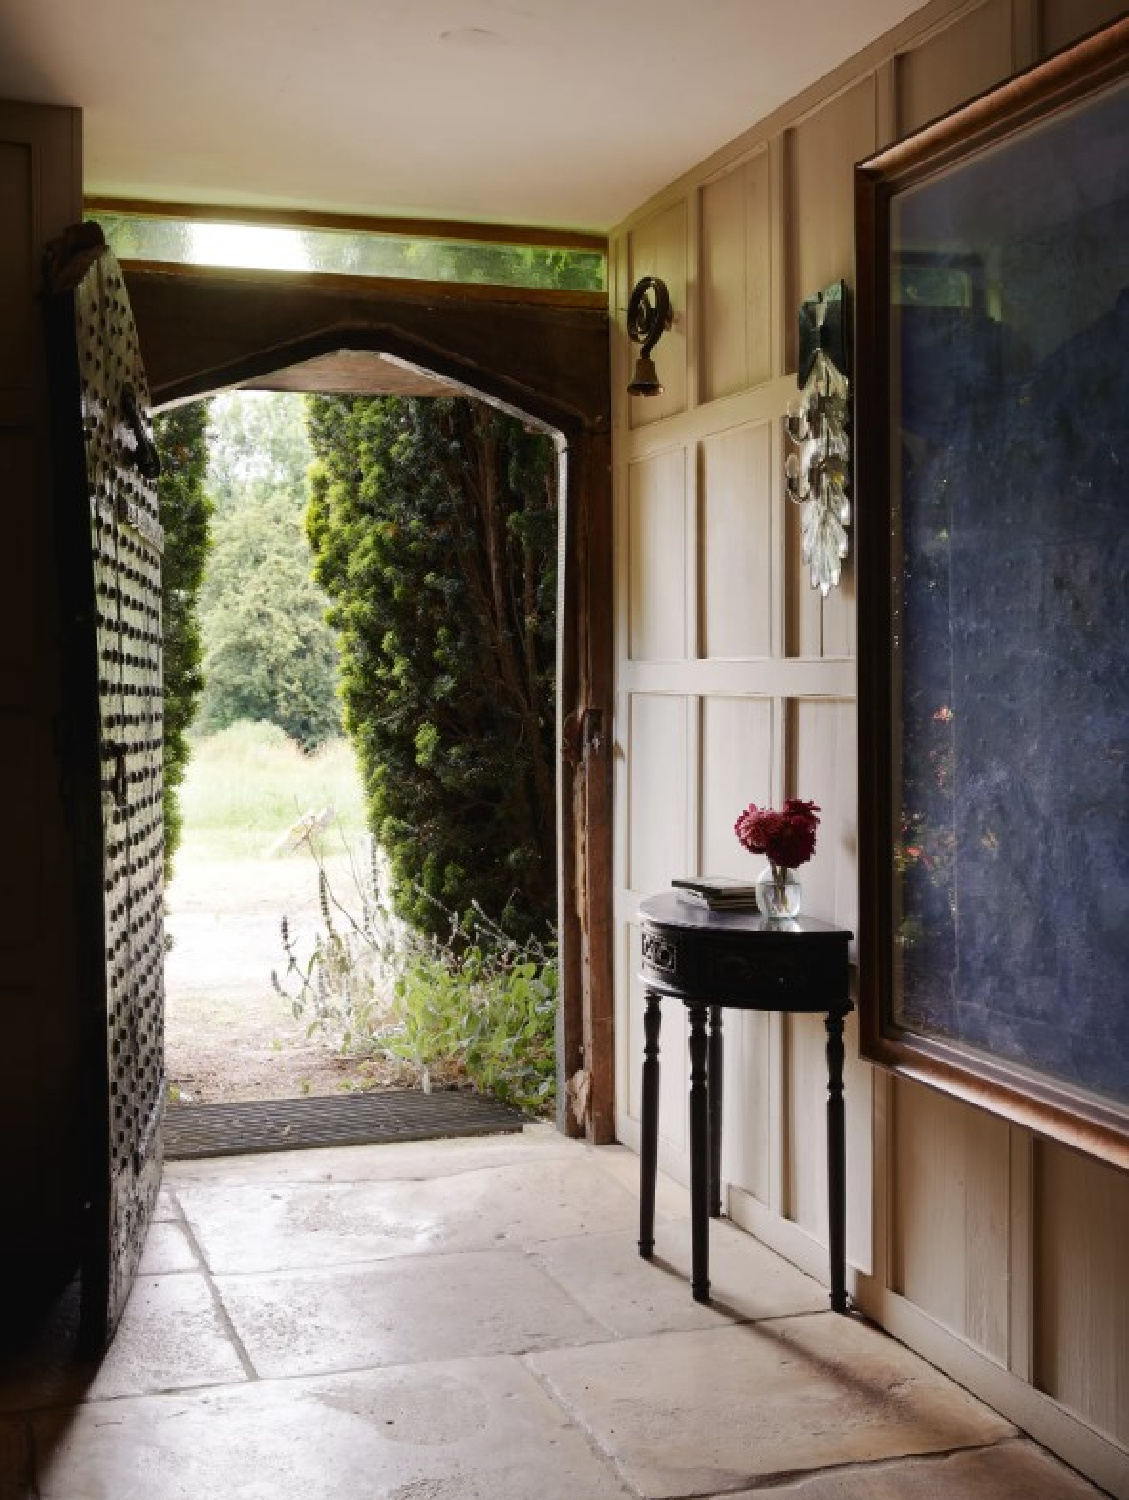 Entry painted Little Greene's Normandy Grey at Cotswold home of Renshaw and Sarah Hiscox in HouseandGardenUK (photo Paul Massey). #cotswoldcottage #englishcountrystyle